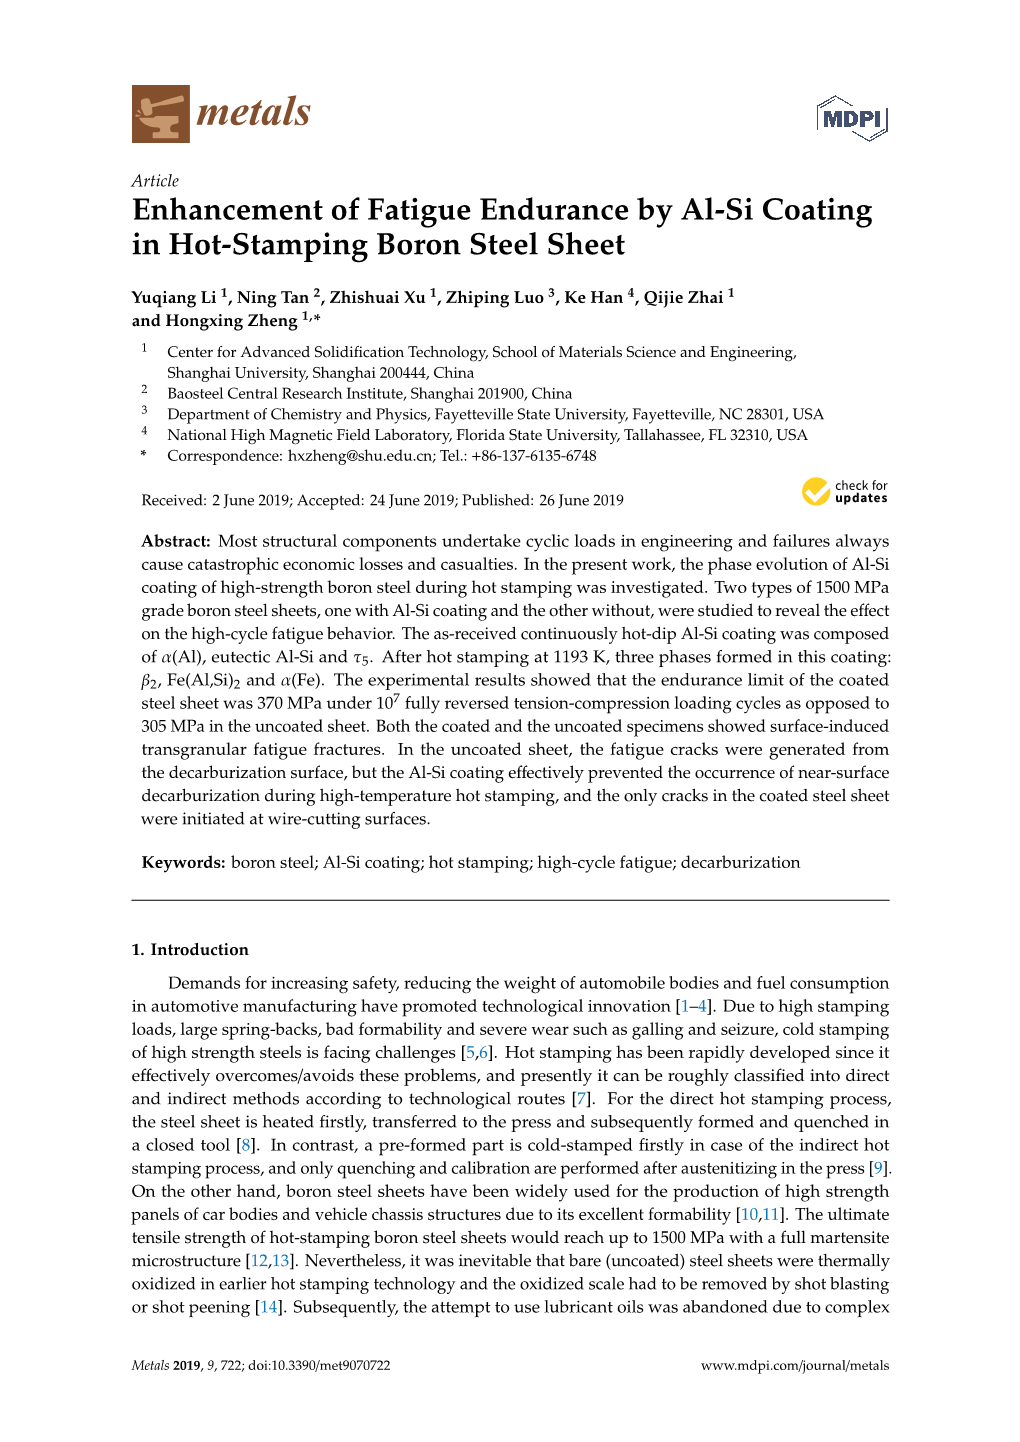 Enhancement of Fatigue Endurance by Al-Si Coating in Hot-Stamping Boron Steel Sheet